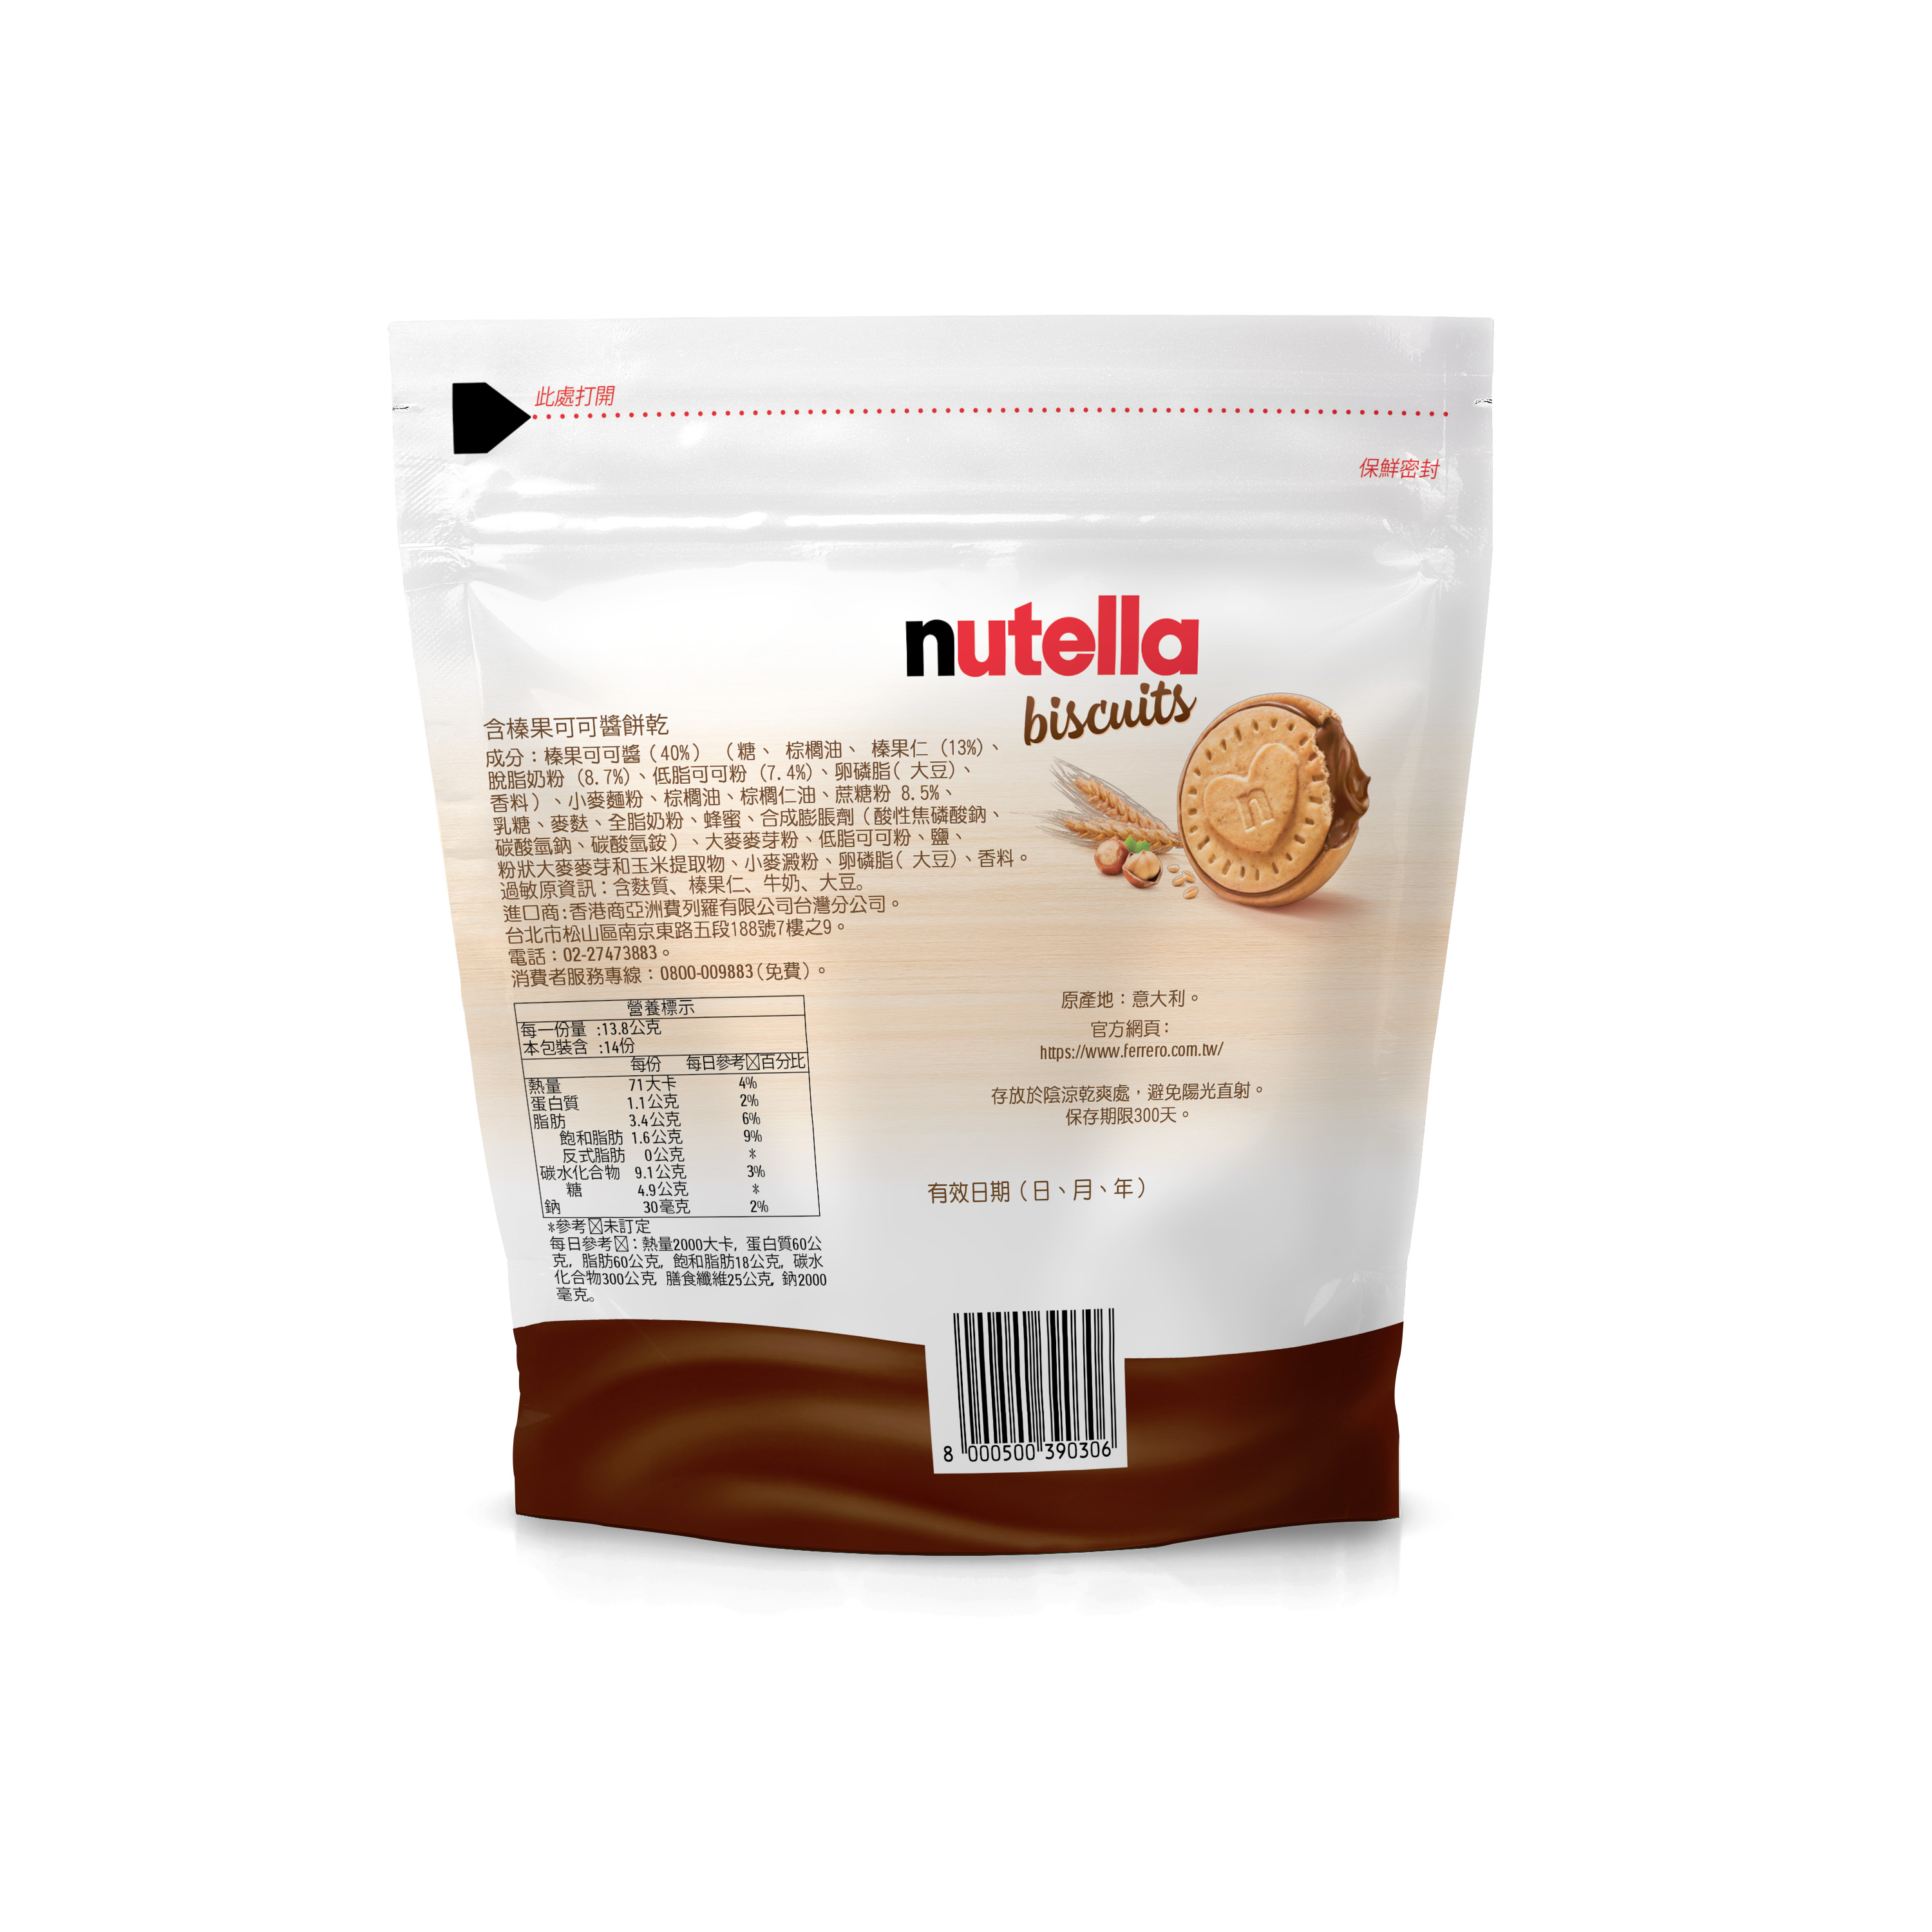 Nutella Biscuit T14, , large